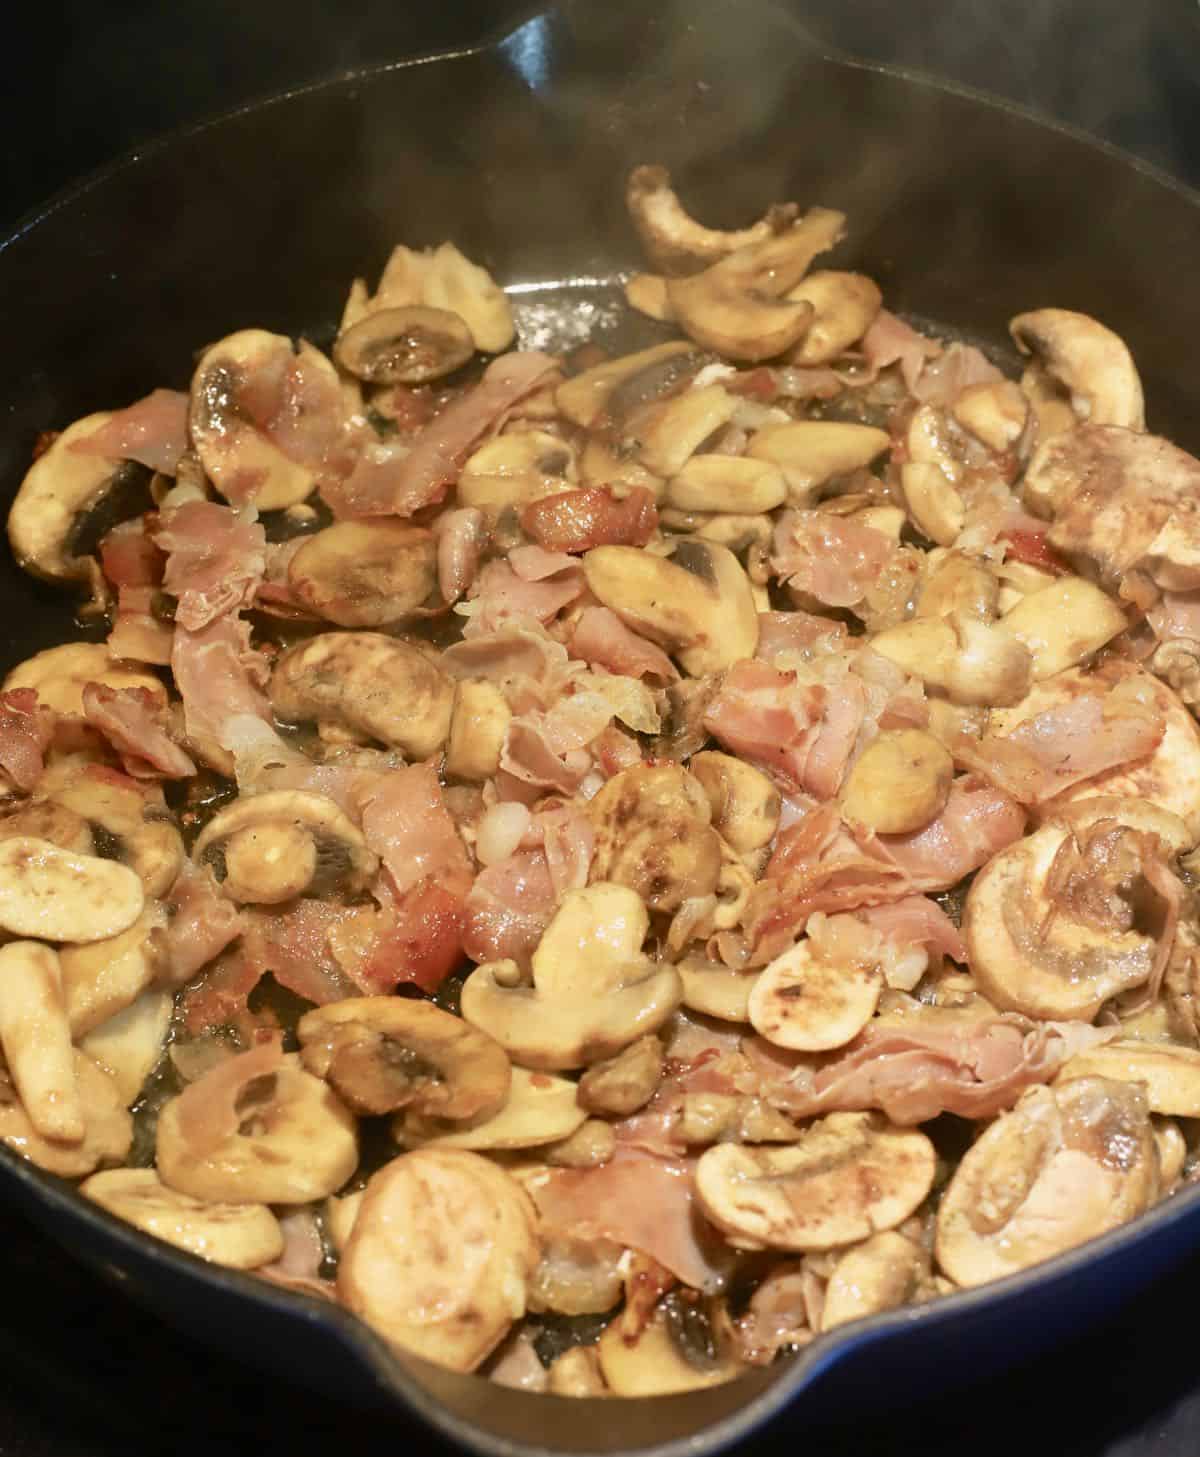 Cooking sliced mushrooms and prosciutto in a cast-iron skillet.